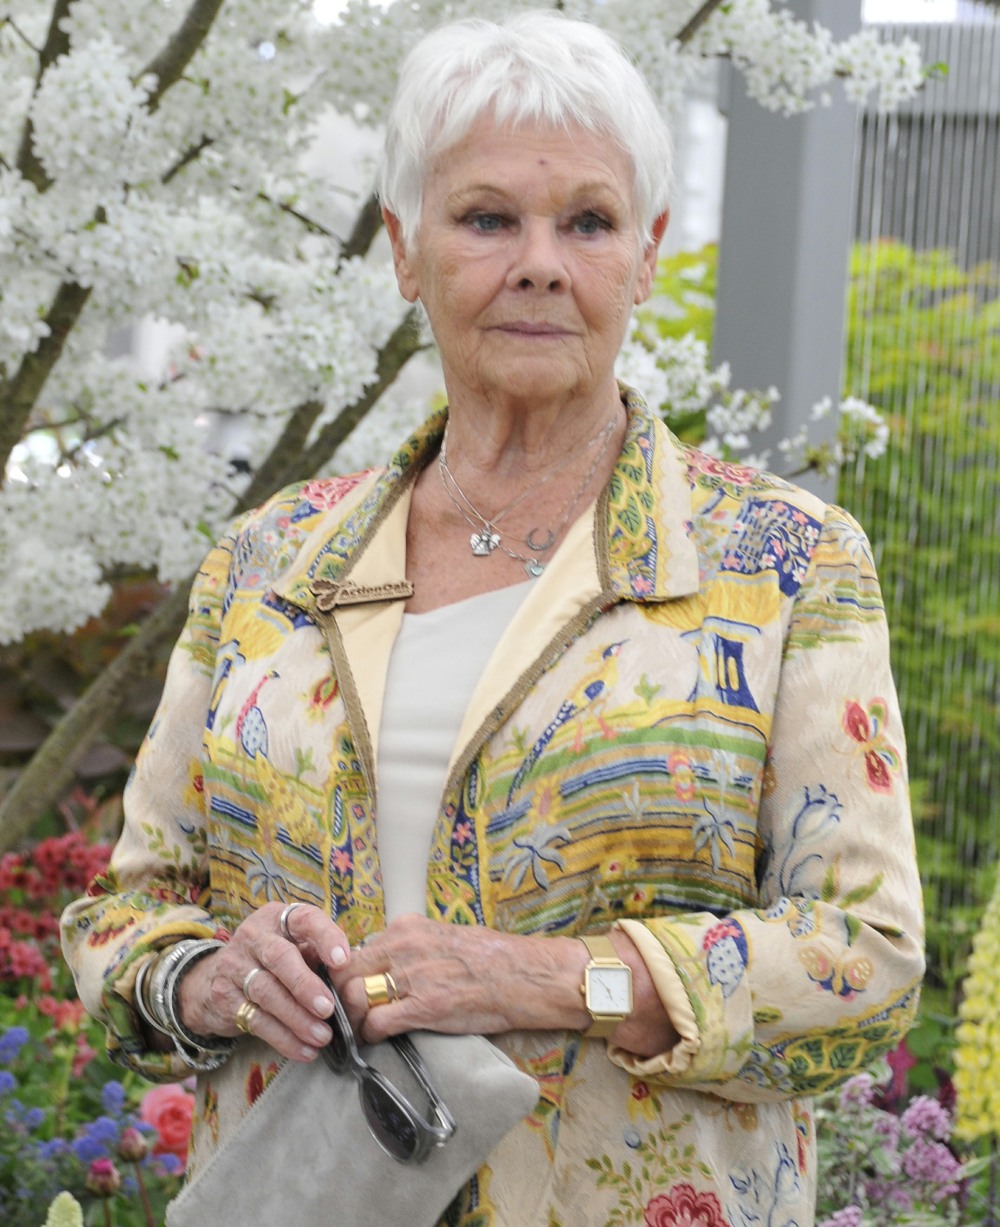 Dame Judi Dench at the RHS Chelsea Flower Show on Press Day - 20 May 2019.